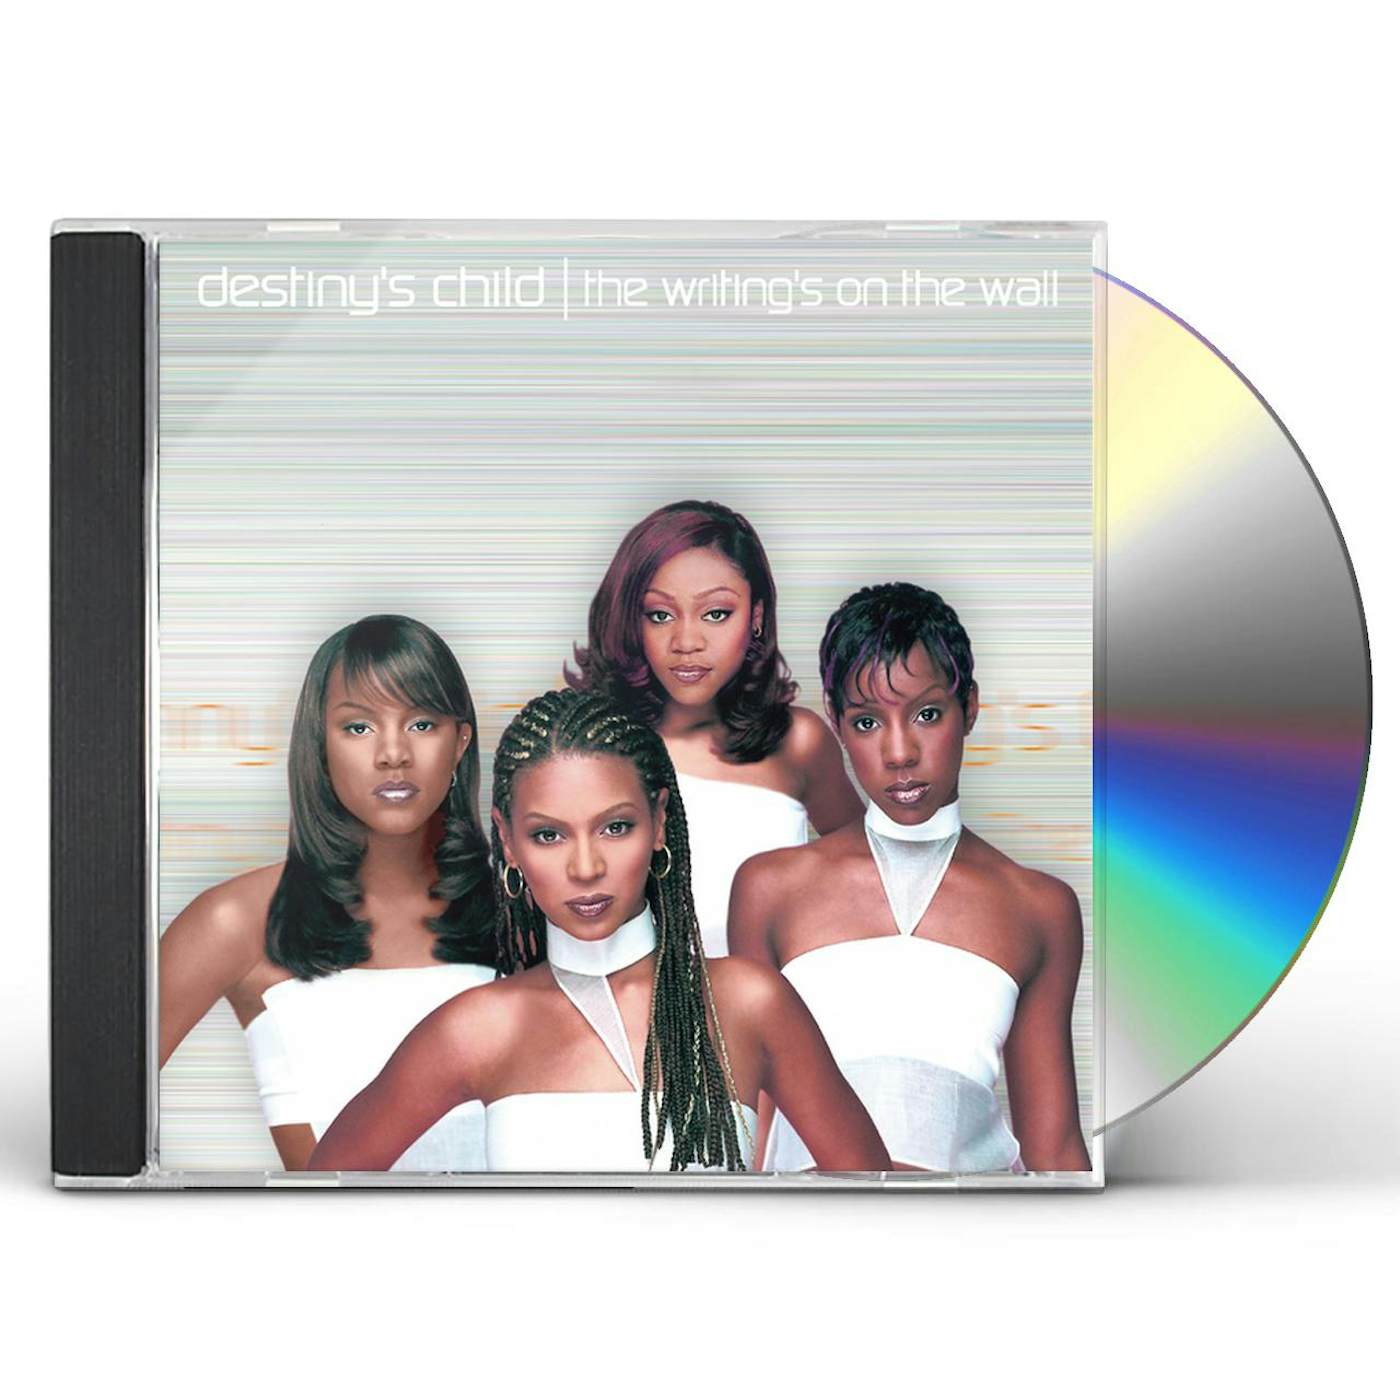 Destiny's Child WRITINGS ON THE WALL CD